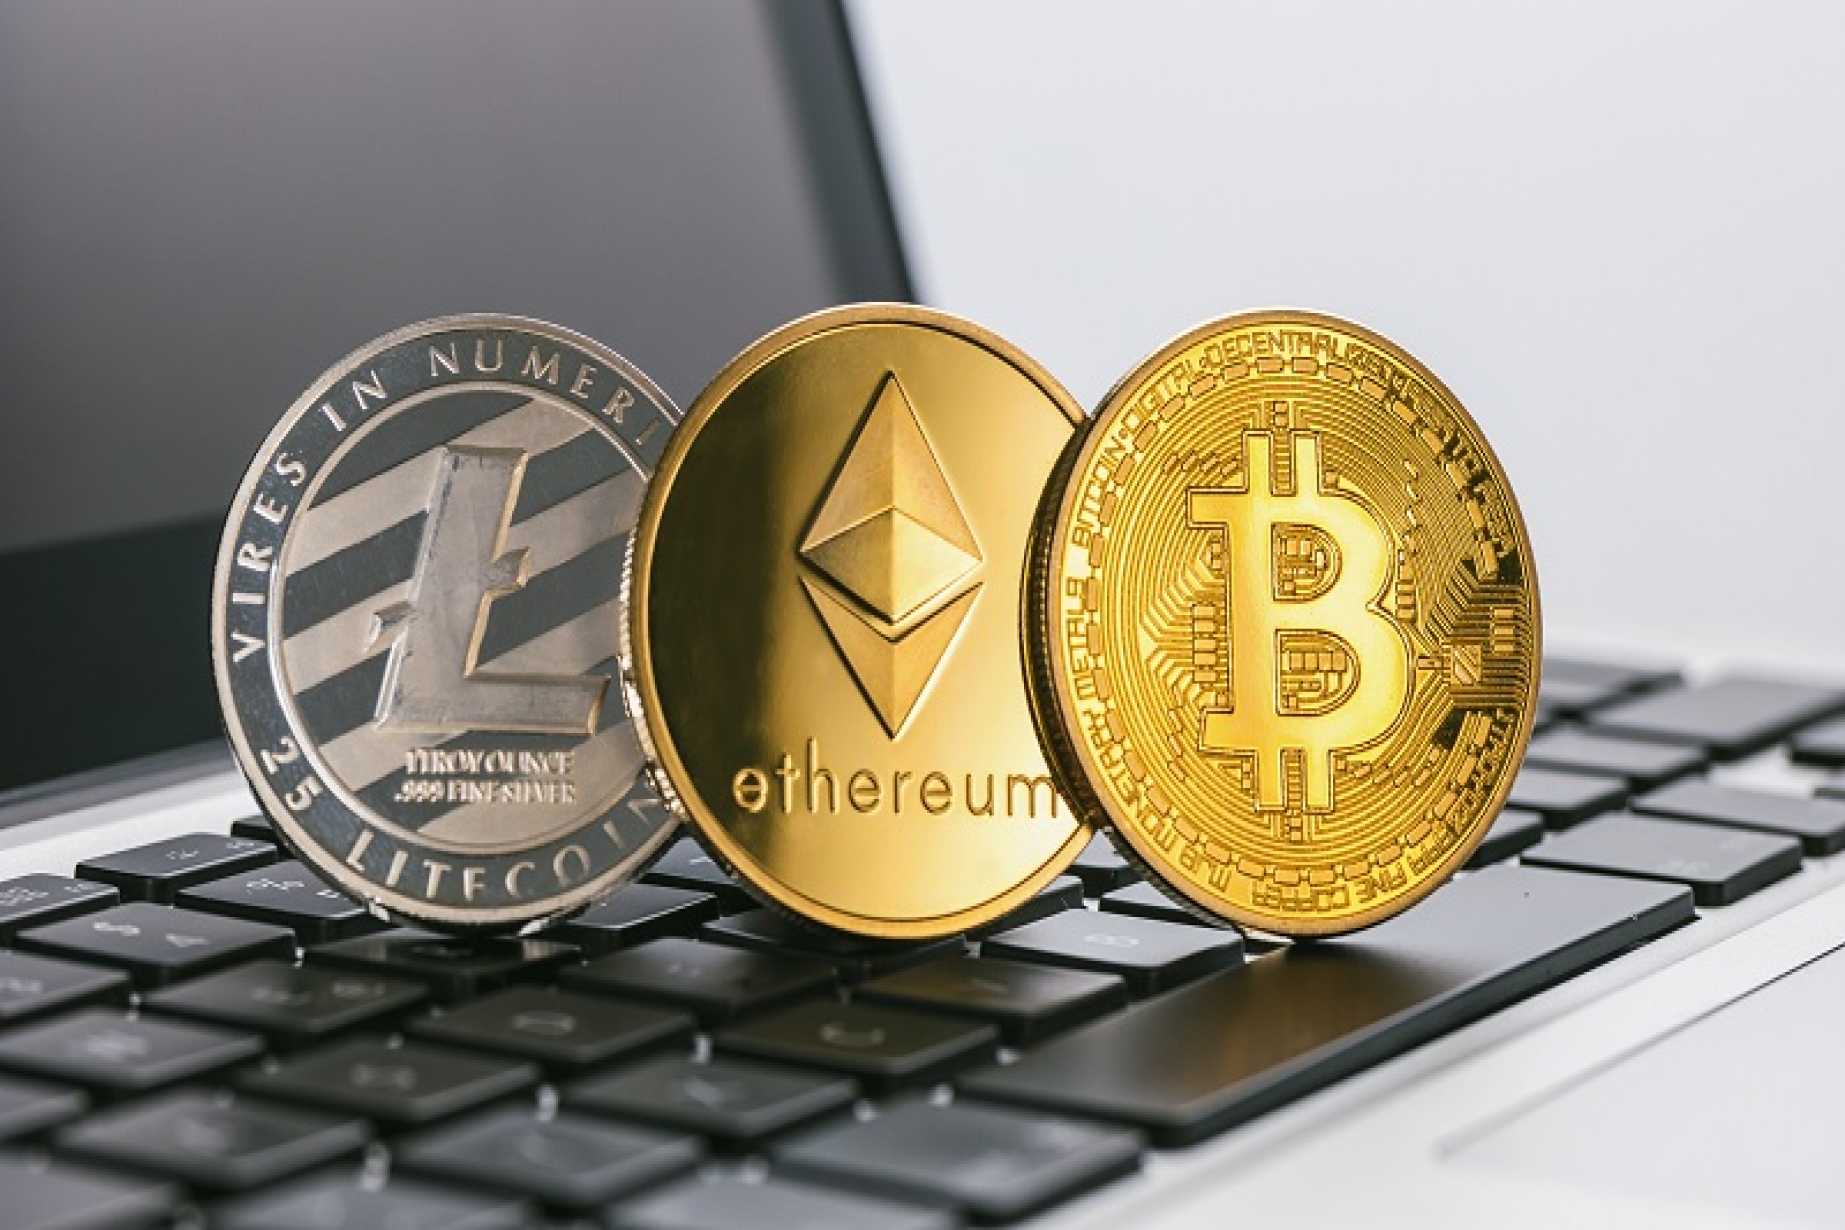 How to Buy Ethereum: a Guide on How and Where to Buy Ethereum